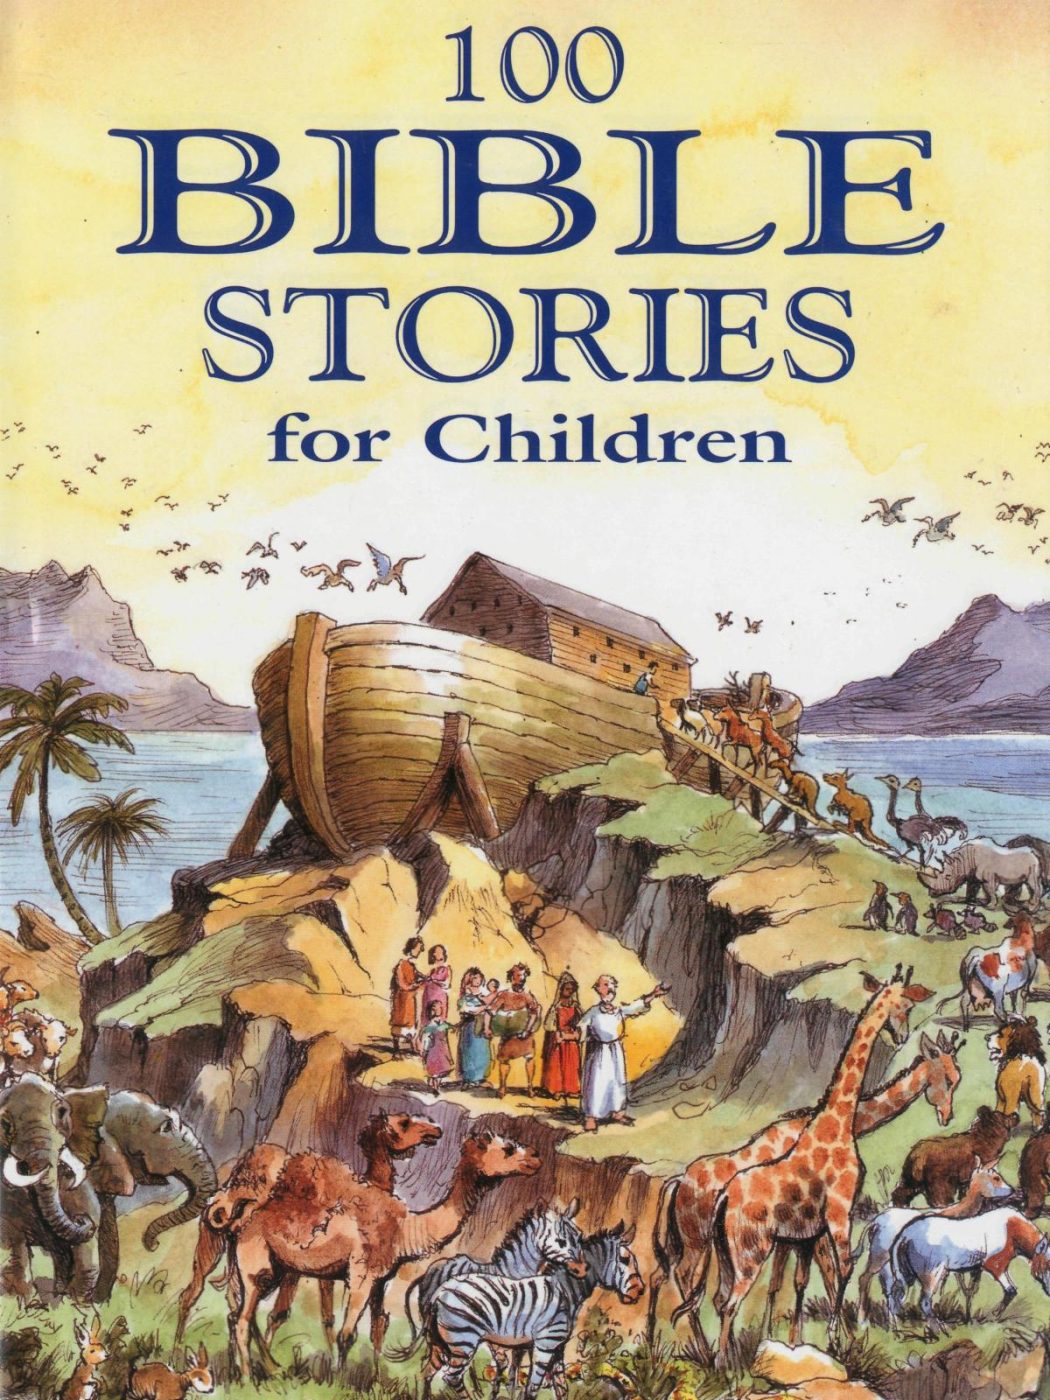 09449_1-award-publications-100-bible-stories-for-children 15 Creative giveaways ideas for kids